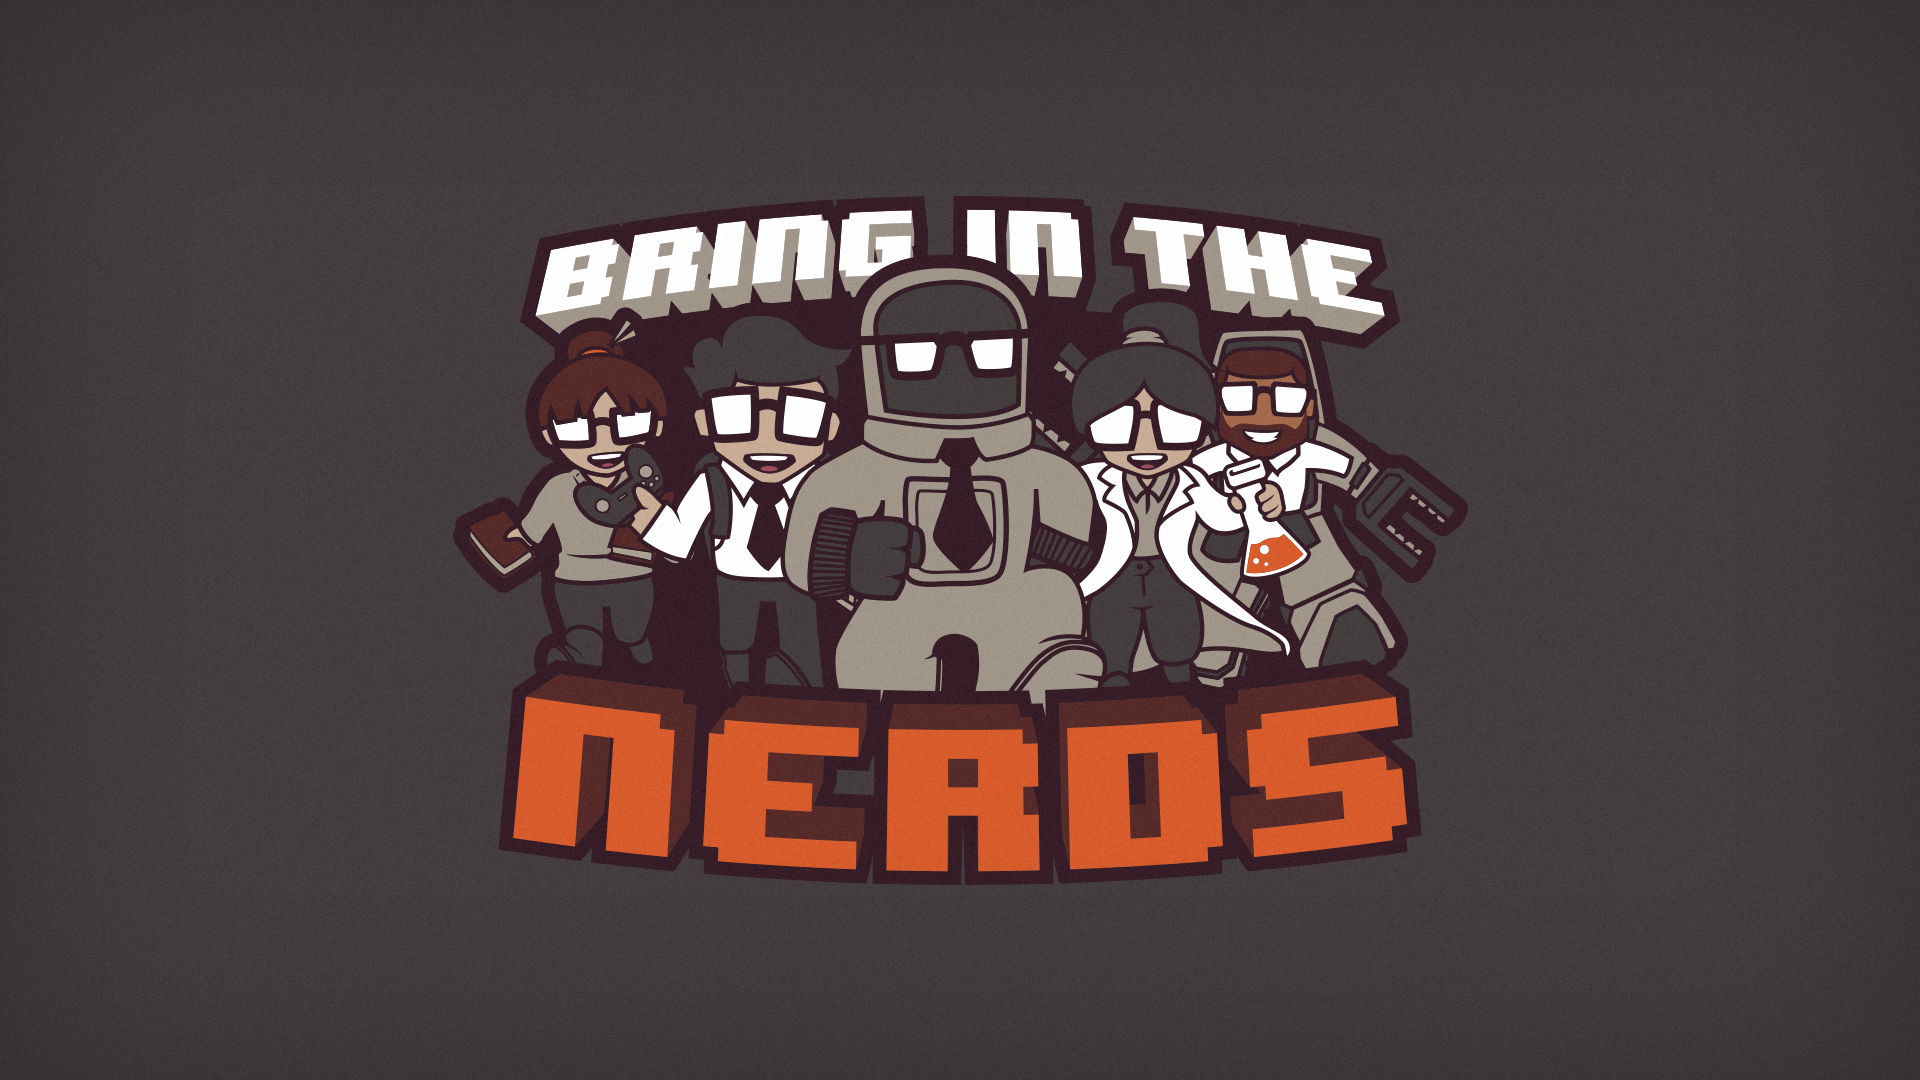 Bring In The Nerds! - Wallpaper Edition by blo0p on DeviantArt